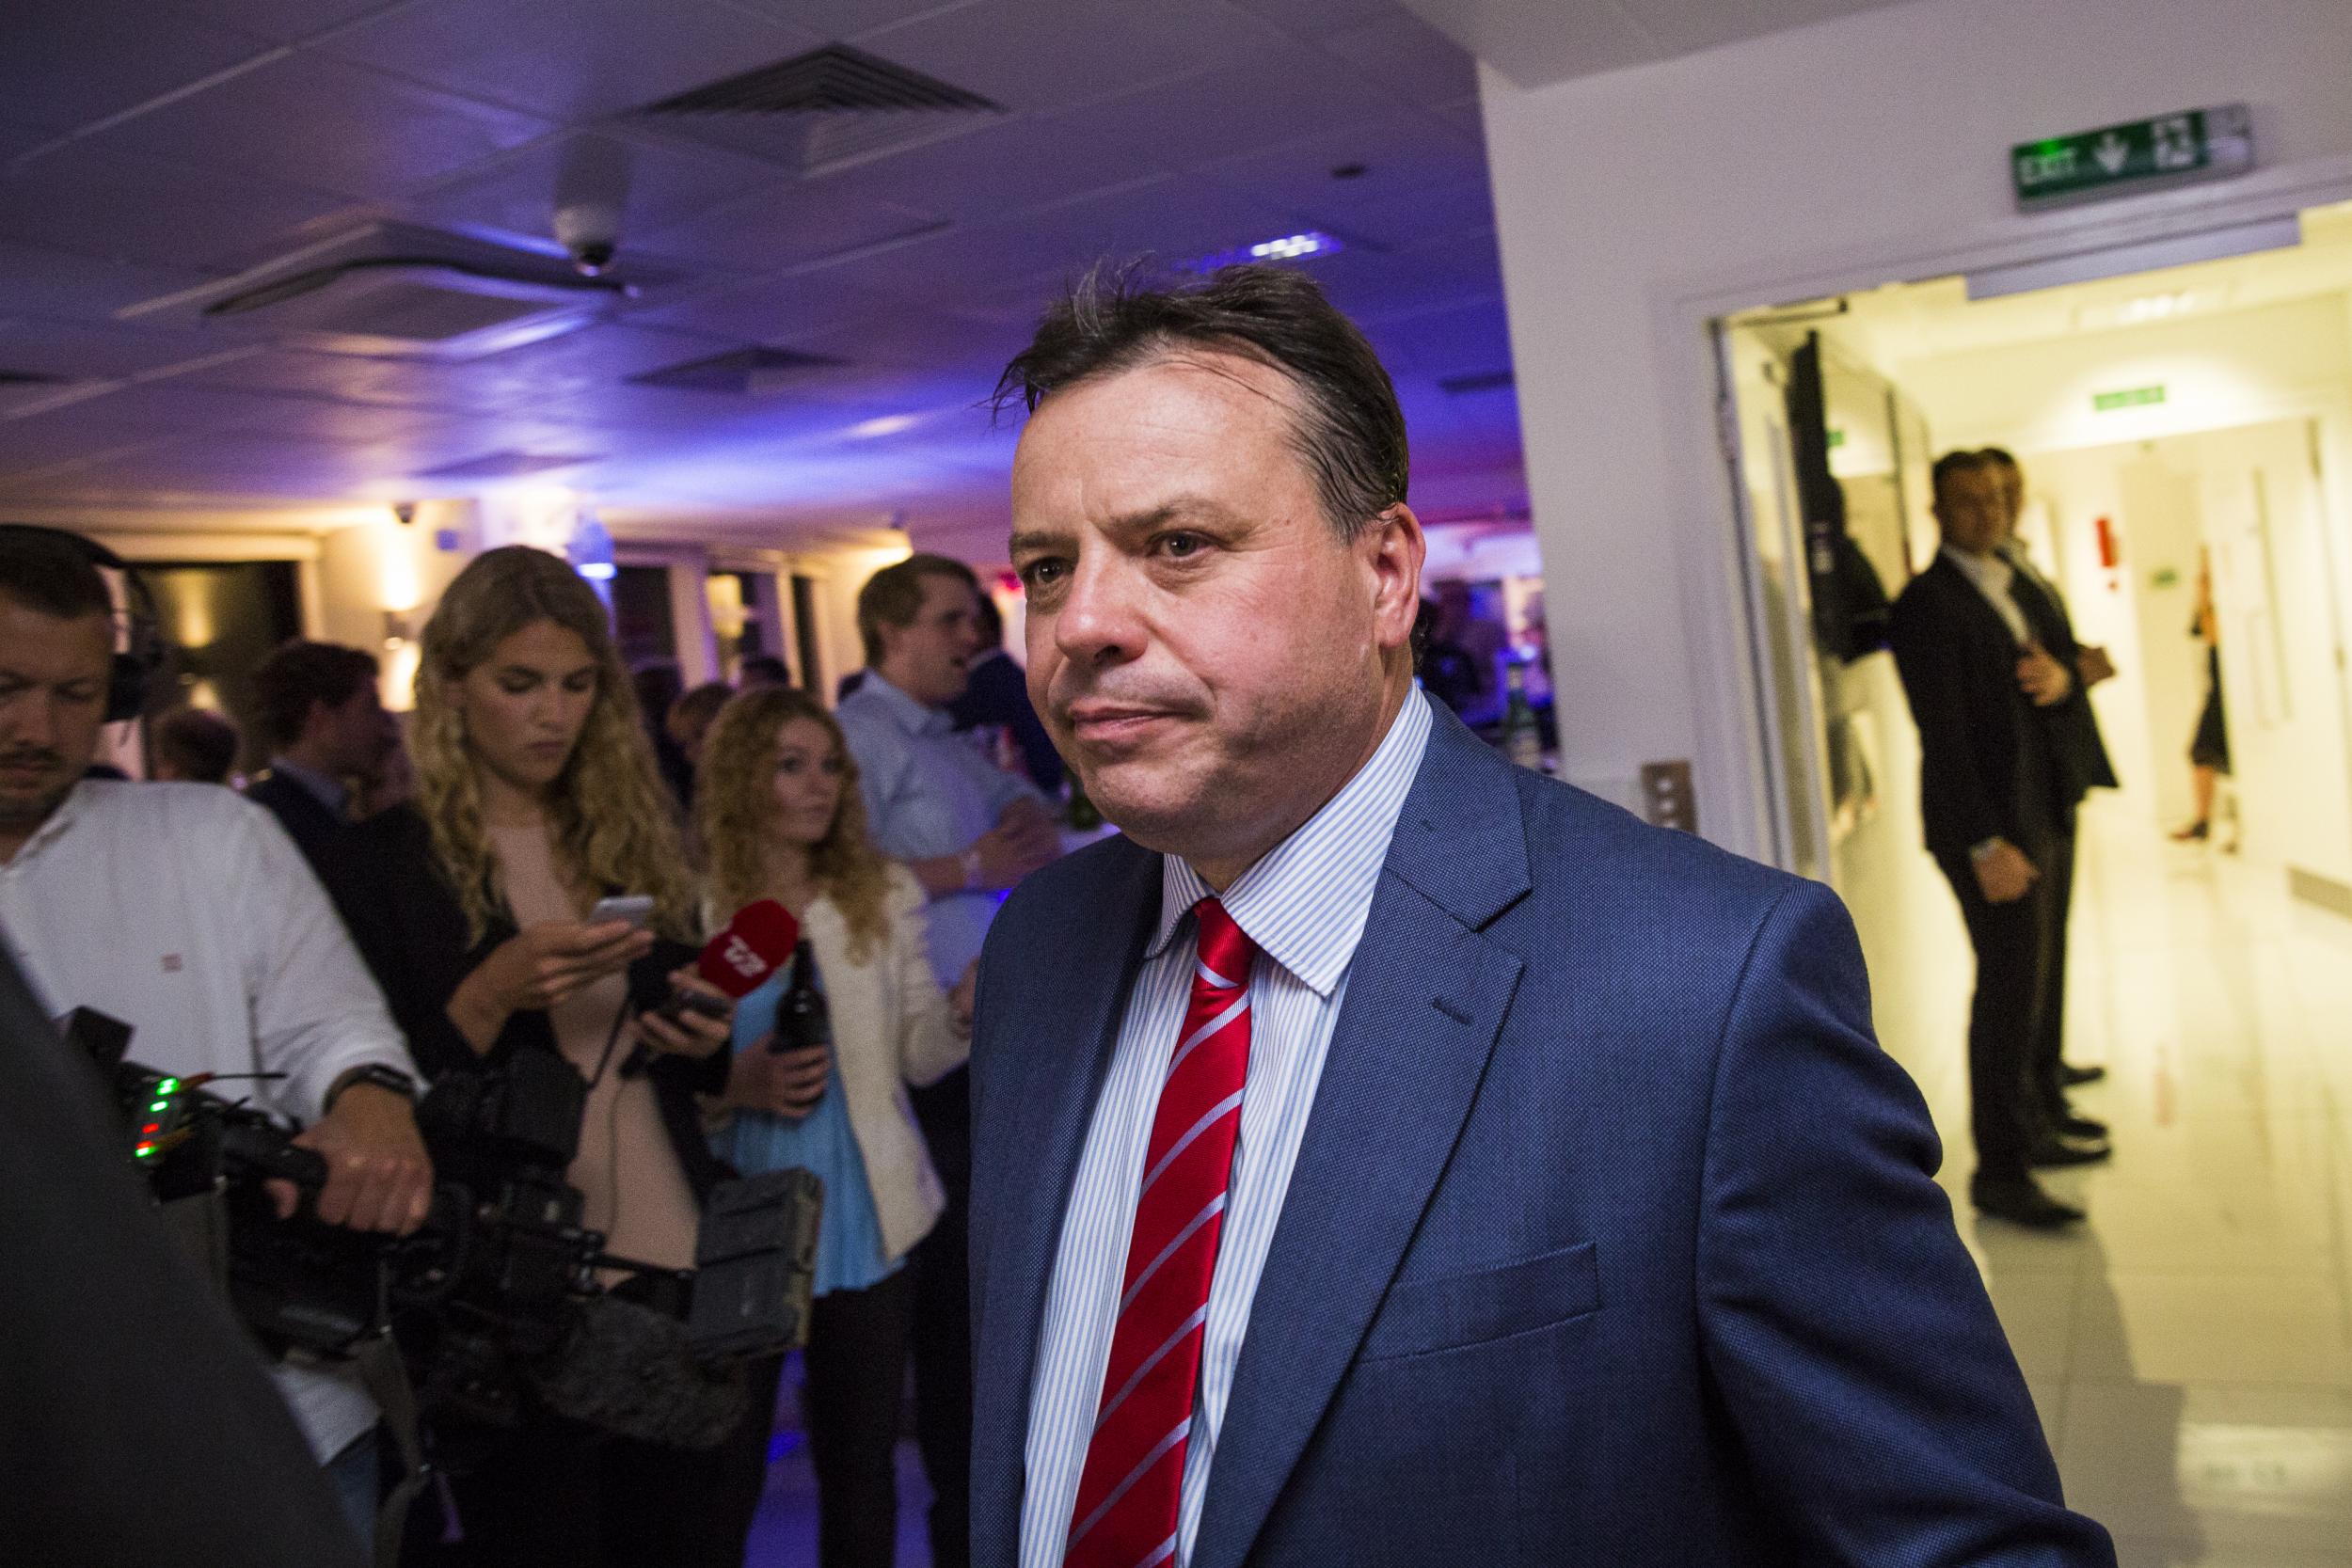 Arron Banks said the Leave campaign was influenced by 'Trump success'